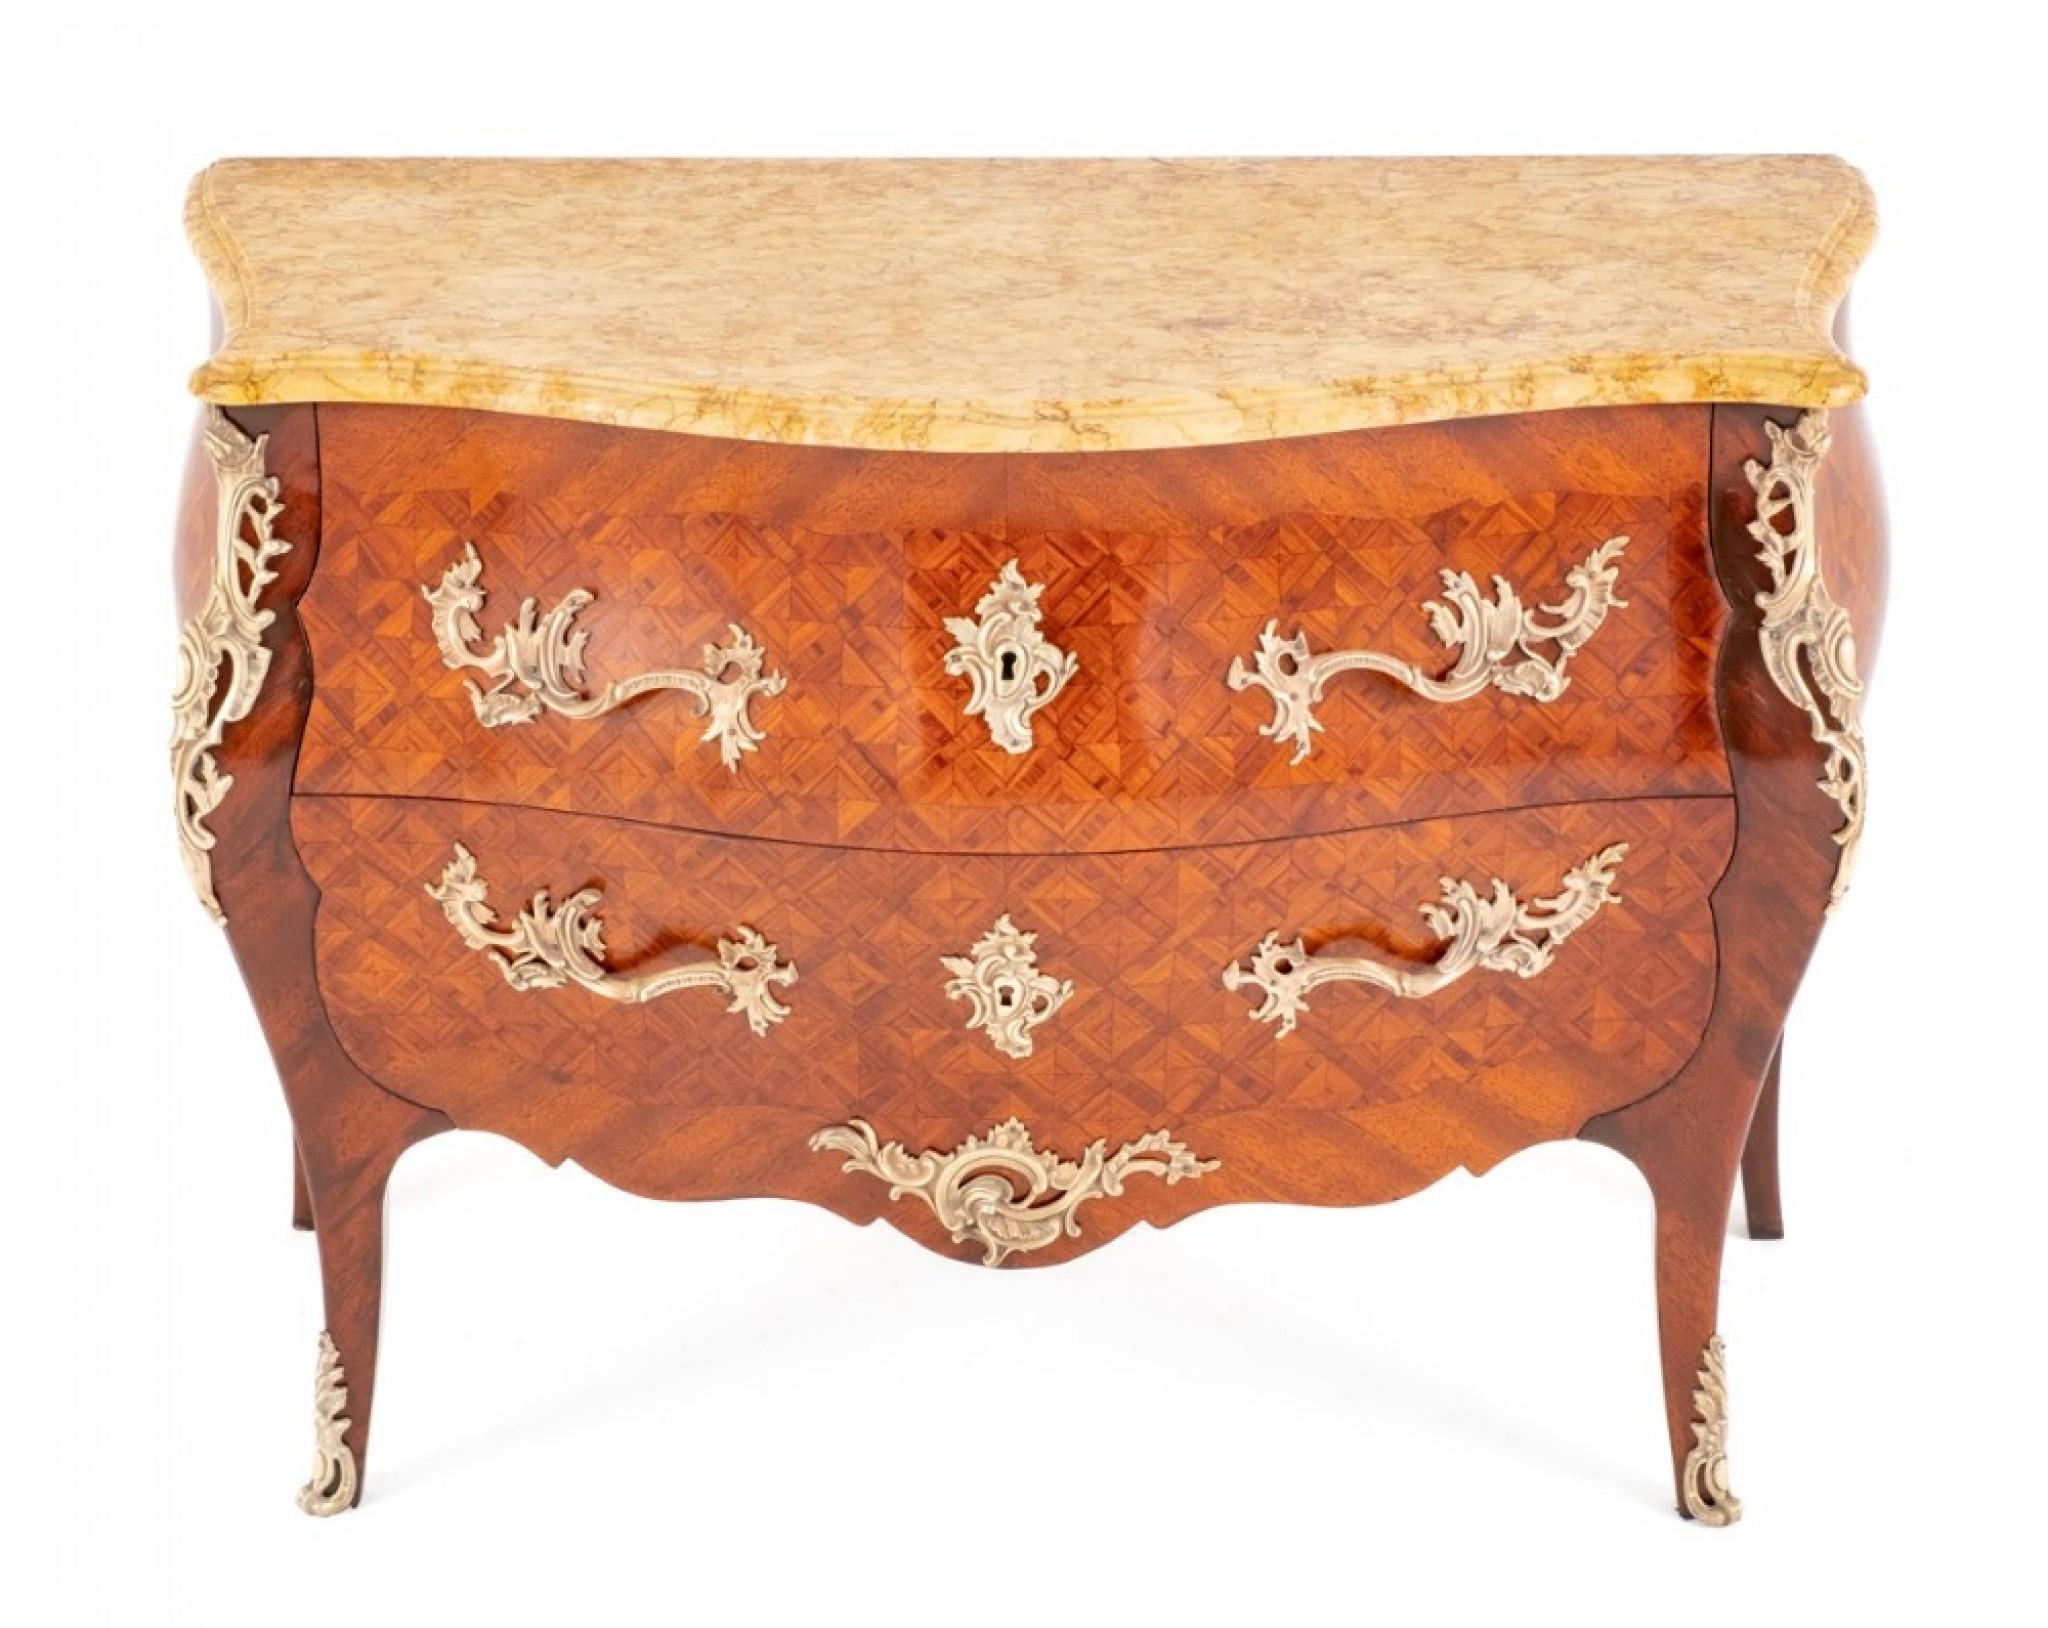 French Walnut Louis XVI Style Serpentine Commode. 
Circa 1900 on this fine French antique commode
Please scroll through for more pix - this ships anywhere, please get in touch
Purchased from a dealer on Marche Biron at Paris antiques markets
This